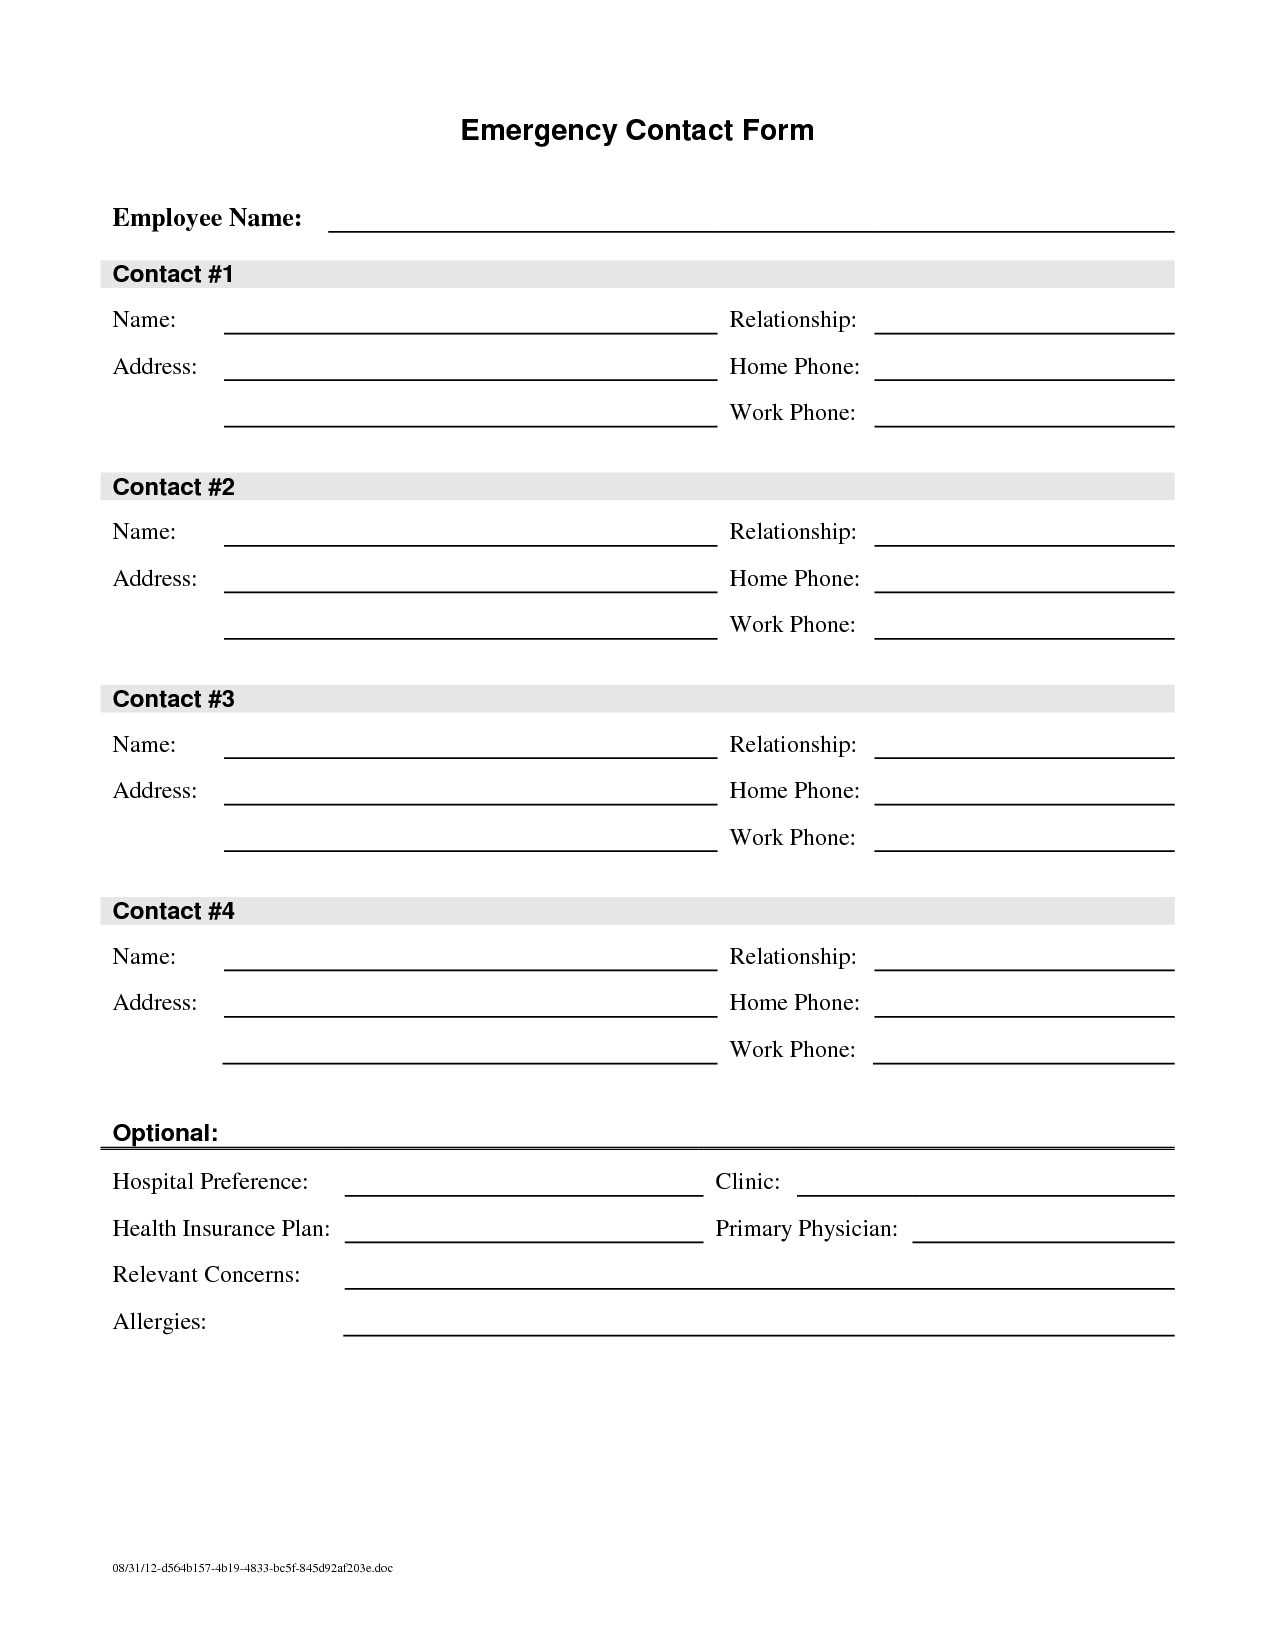 printable-employee-emergency-contact-form-template-free-printable